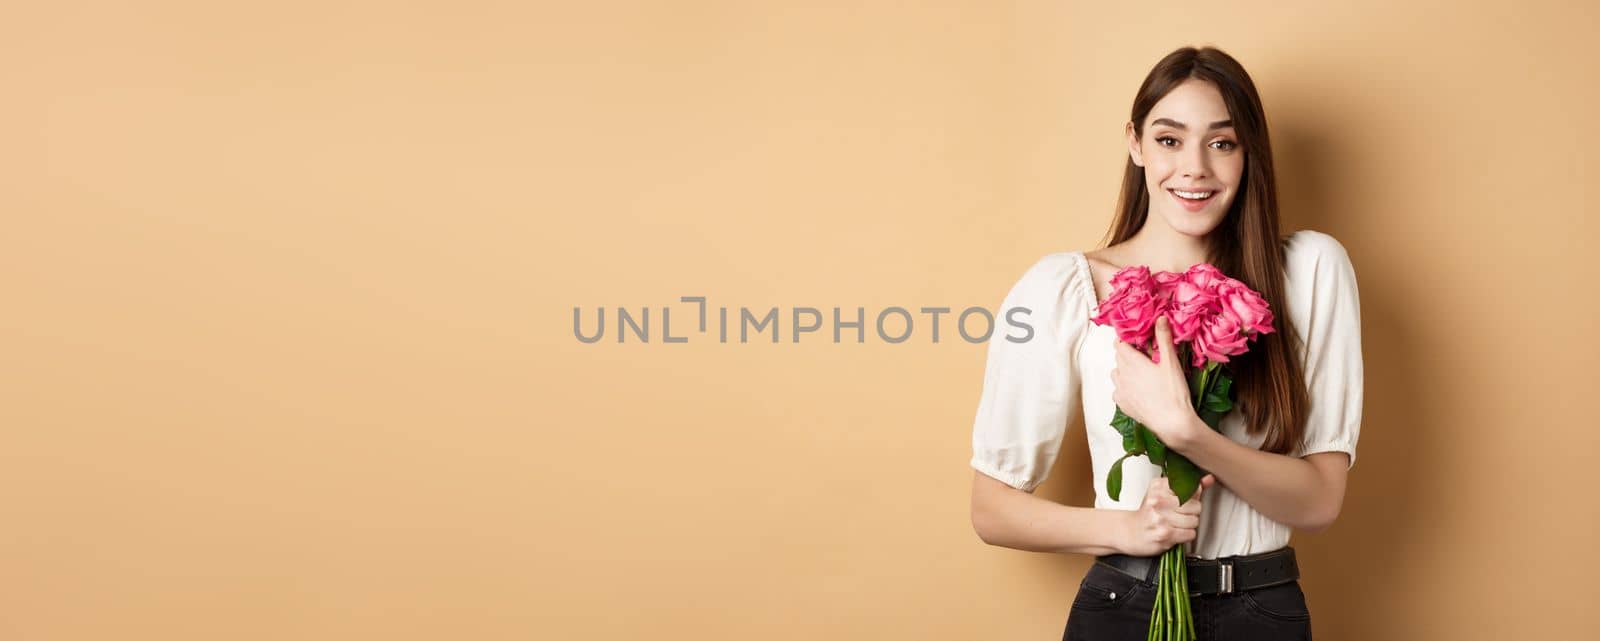 Valentines day. Romantic girl smiling happy at camera, holding bouquet of pink roses from lover, standing on beige background.